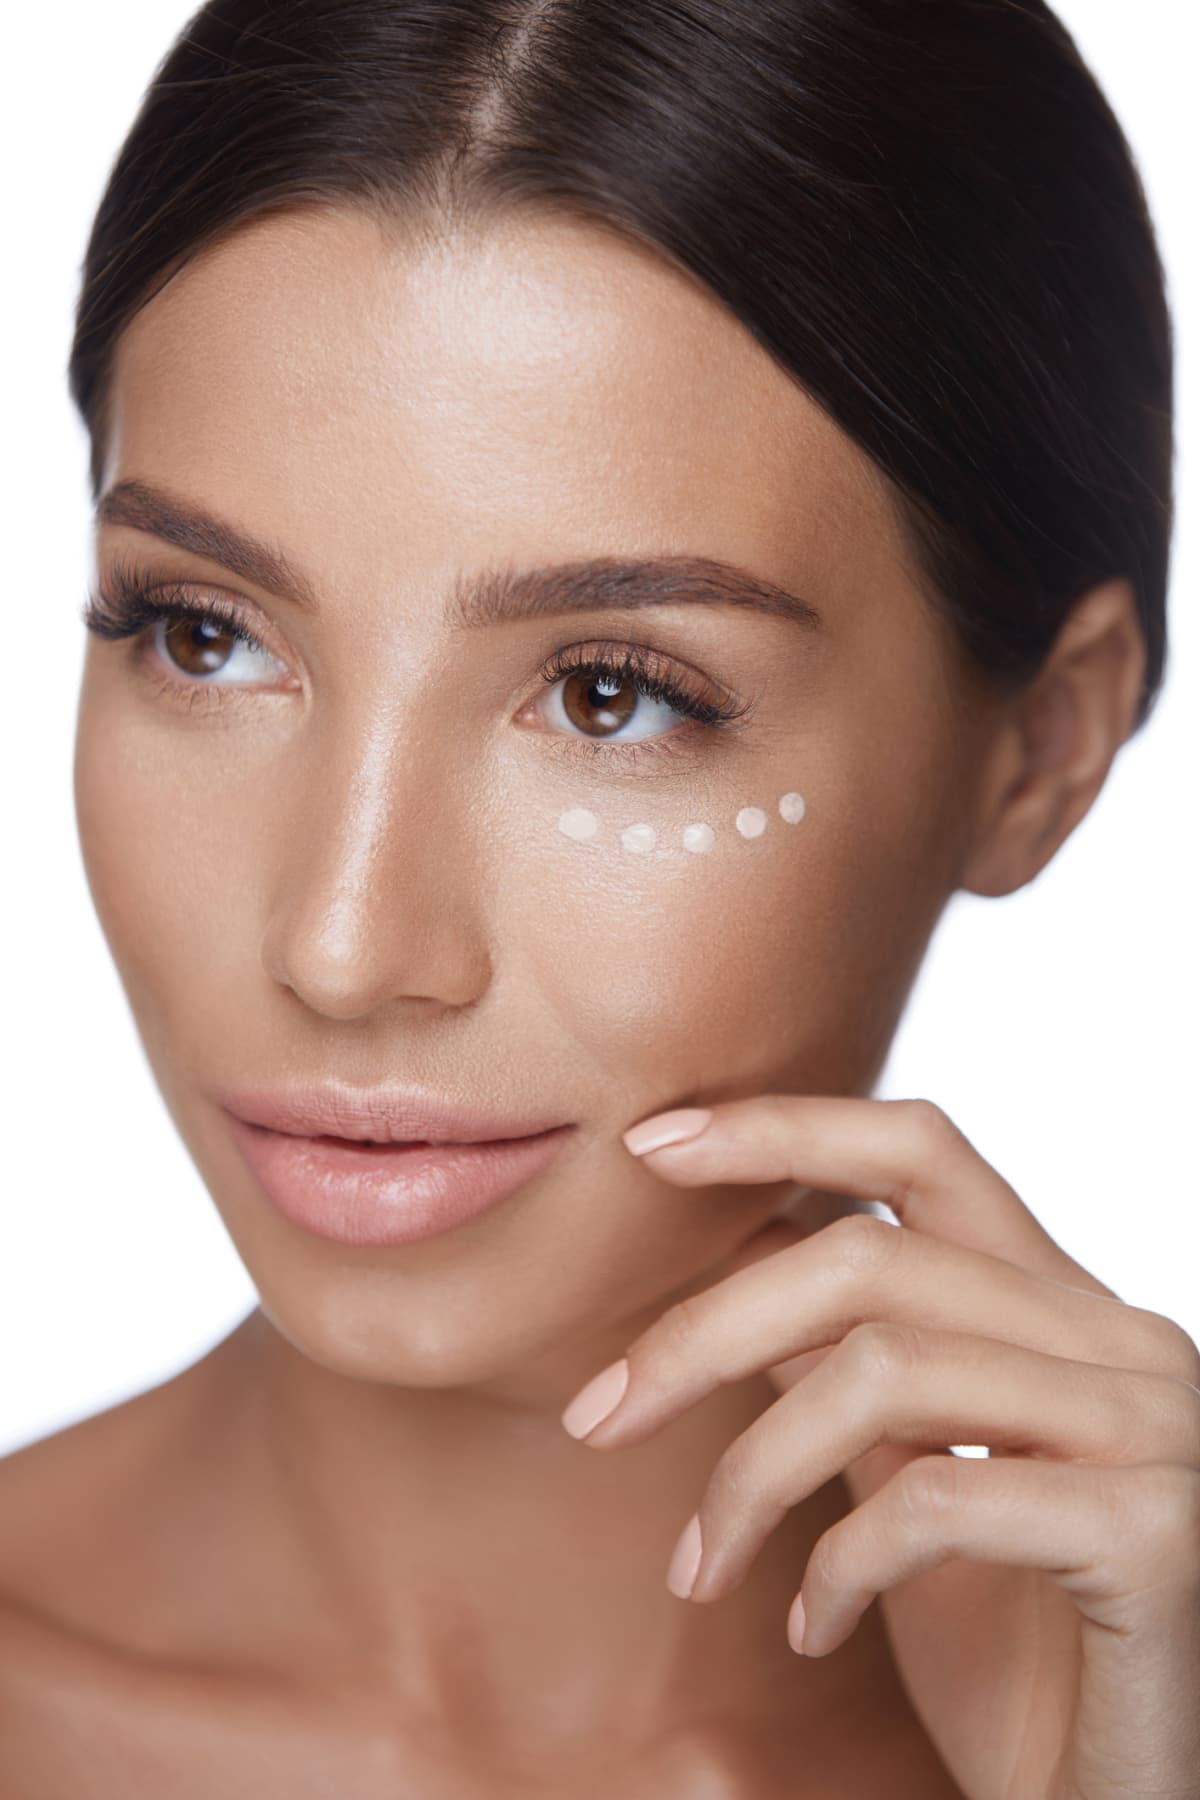 A woman dots concealer under her eyes